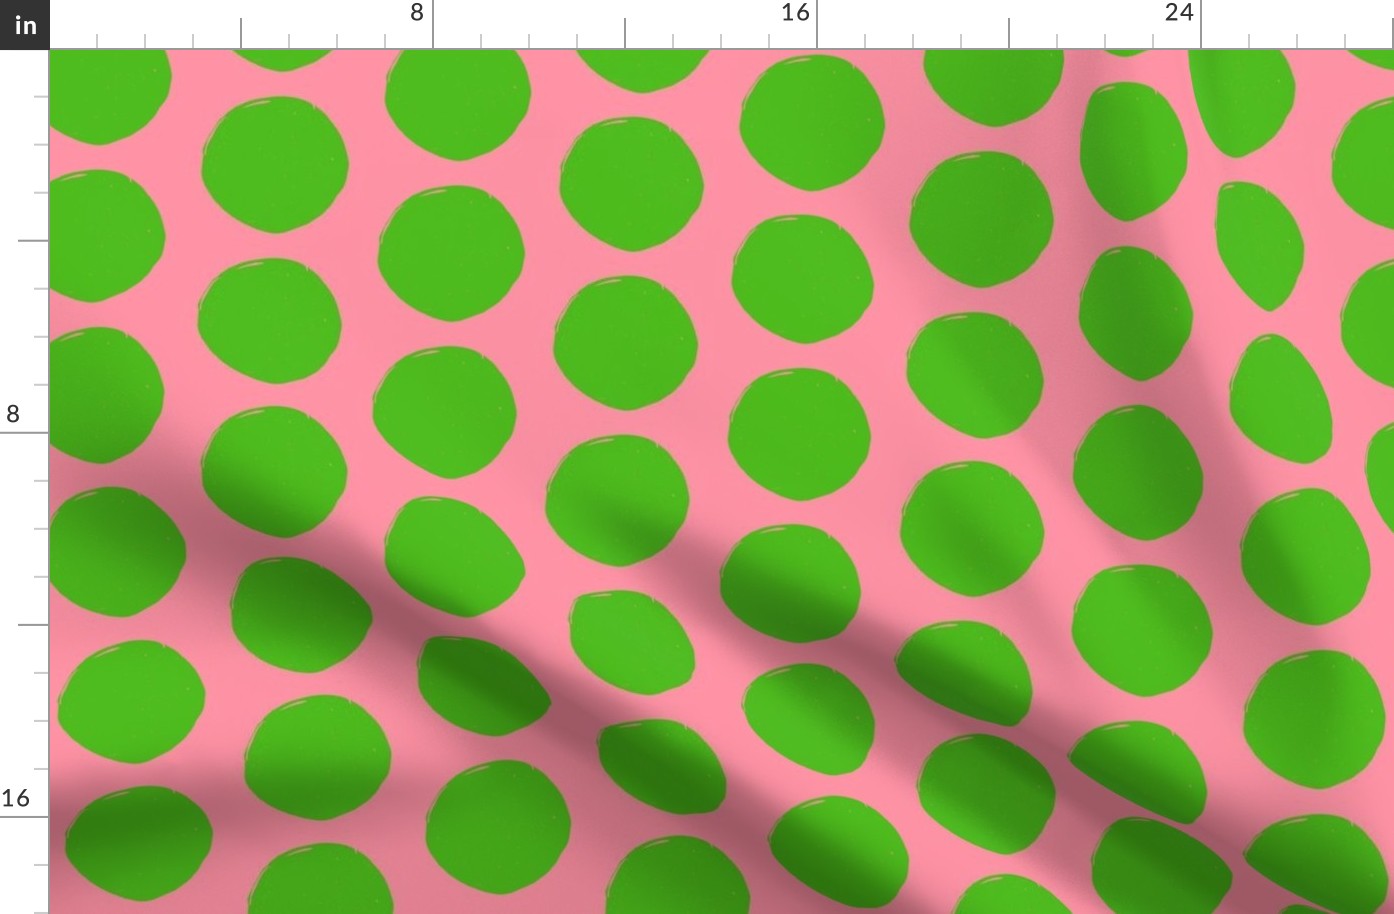 Green with Pink Dots Fabric